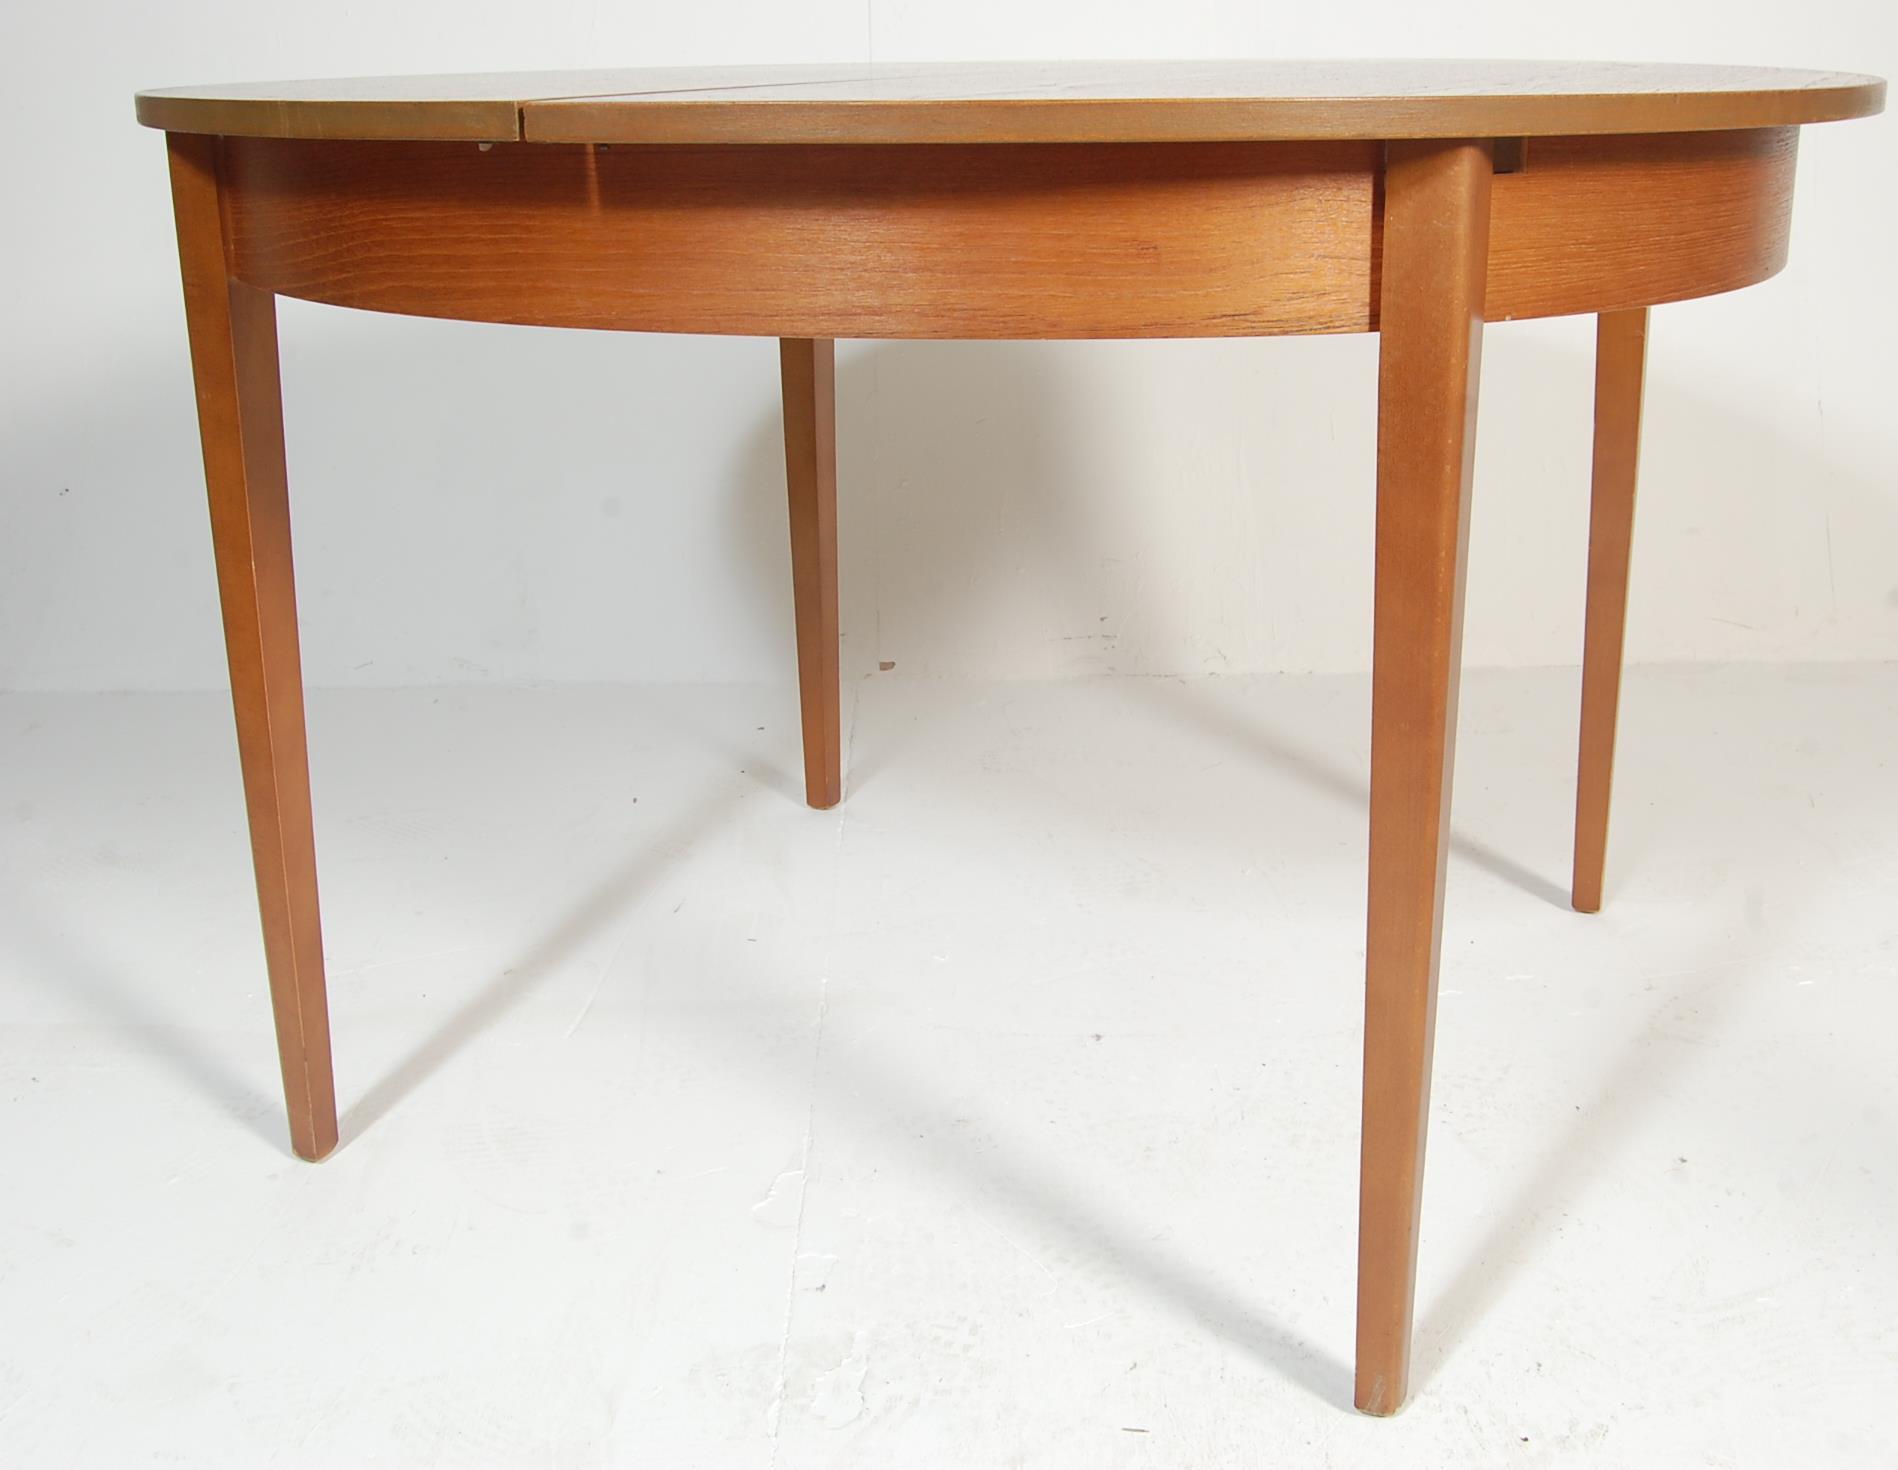 RETRO VINTAGE 1970S TEAK WOOD TABLE AND CHAIRS - Image 4 of 9